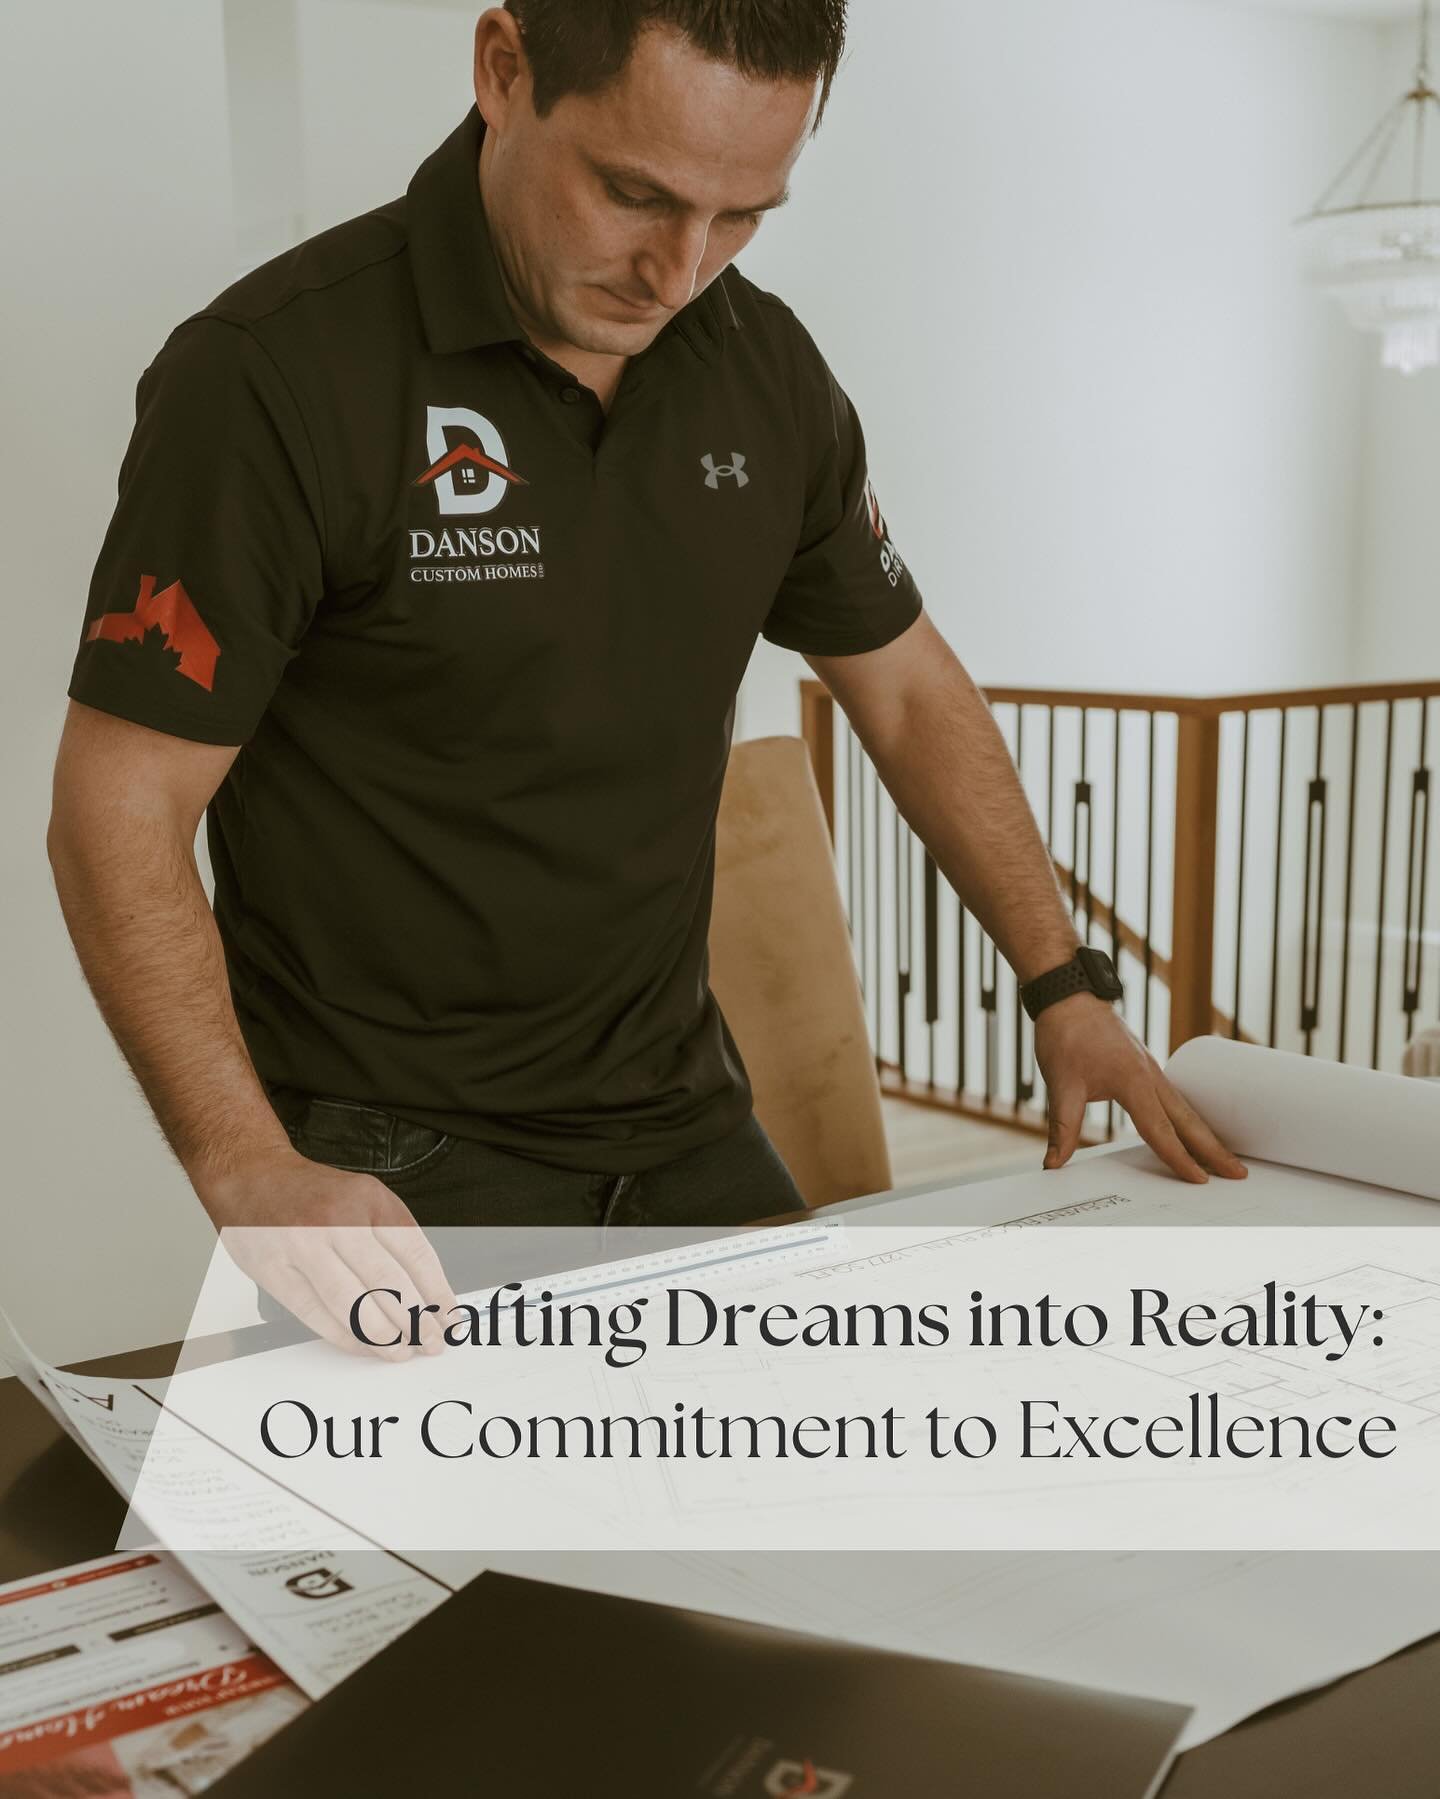 Our dedication to excellence extends far beyond the construction of homes. With over 45 years of industry expertise, our approach is rooted in continual improvement. From our family to yours, we&rsquo;re thrilled to have you here, joining us on our j